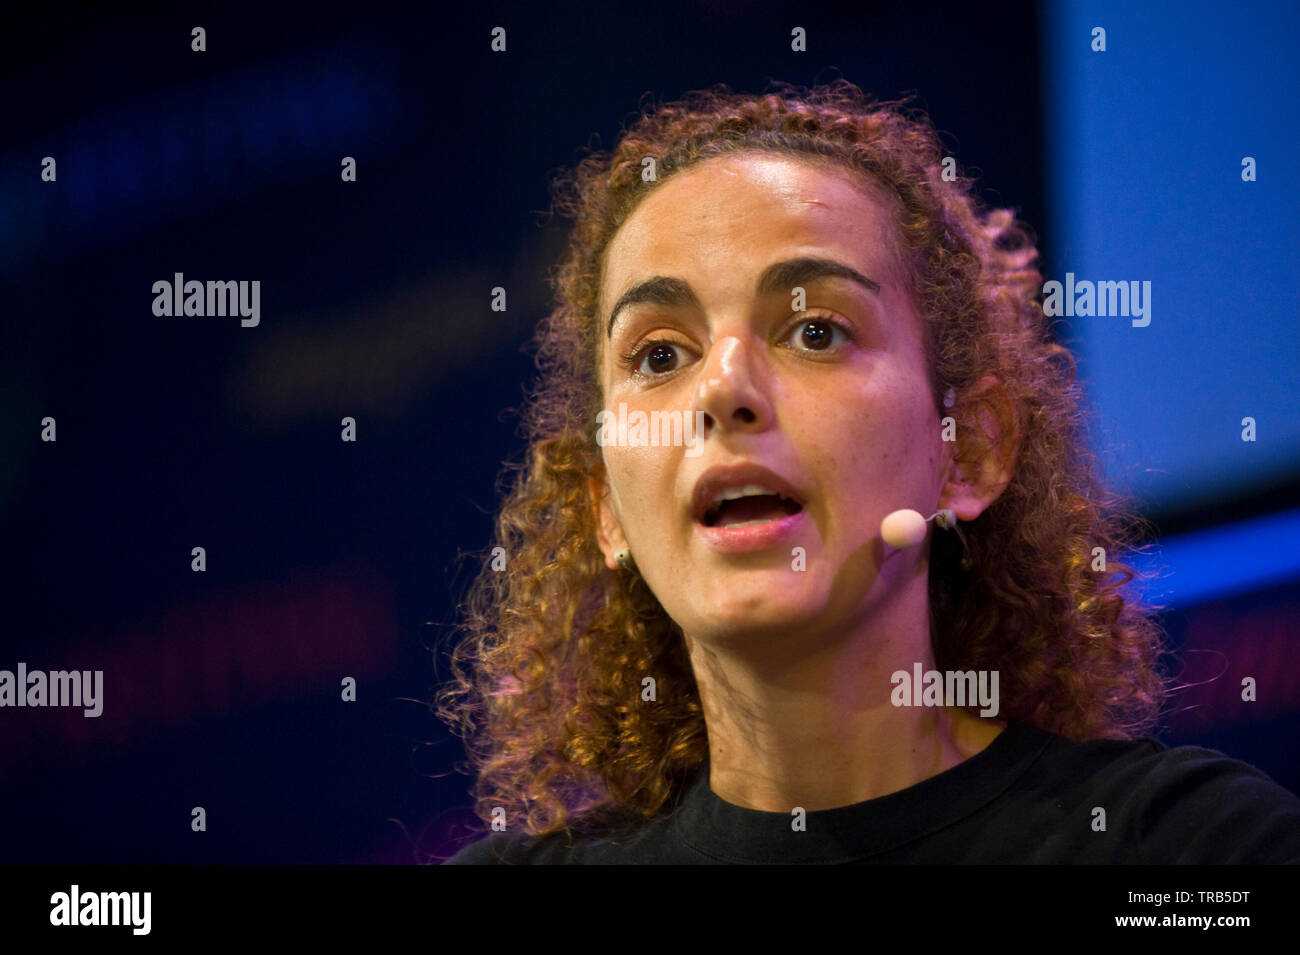 Leila Slimani Moroccan author and winner of France's most prestigious literary prize the Prix Goncourt speaking on stage at Hay Festival Hay on Wye Powys Wales UK Stock Photo